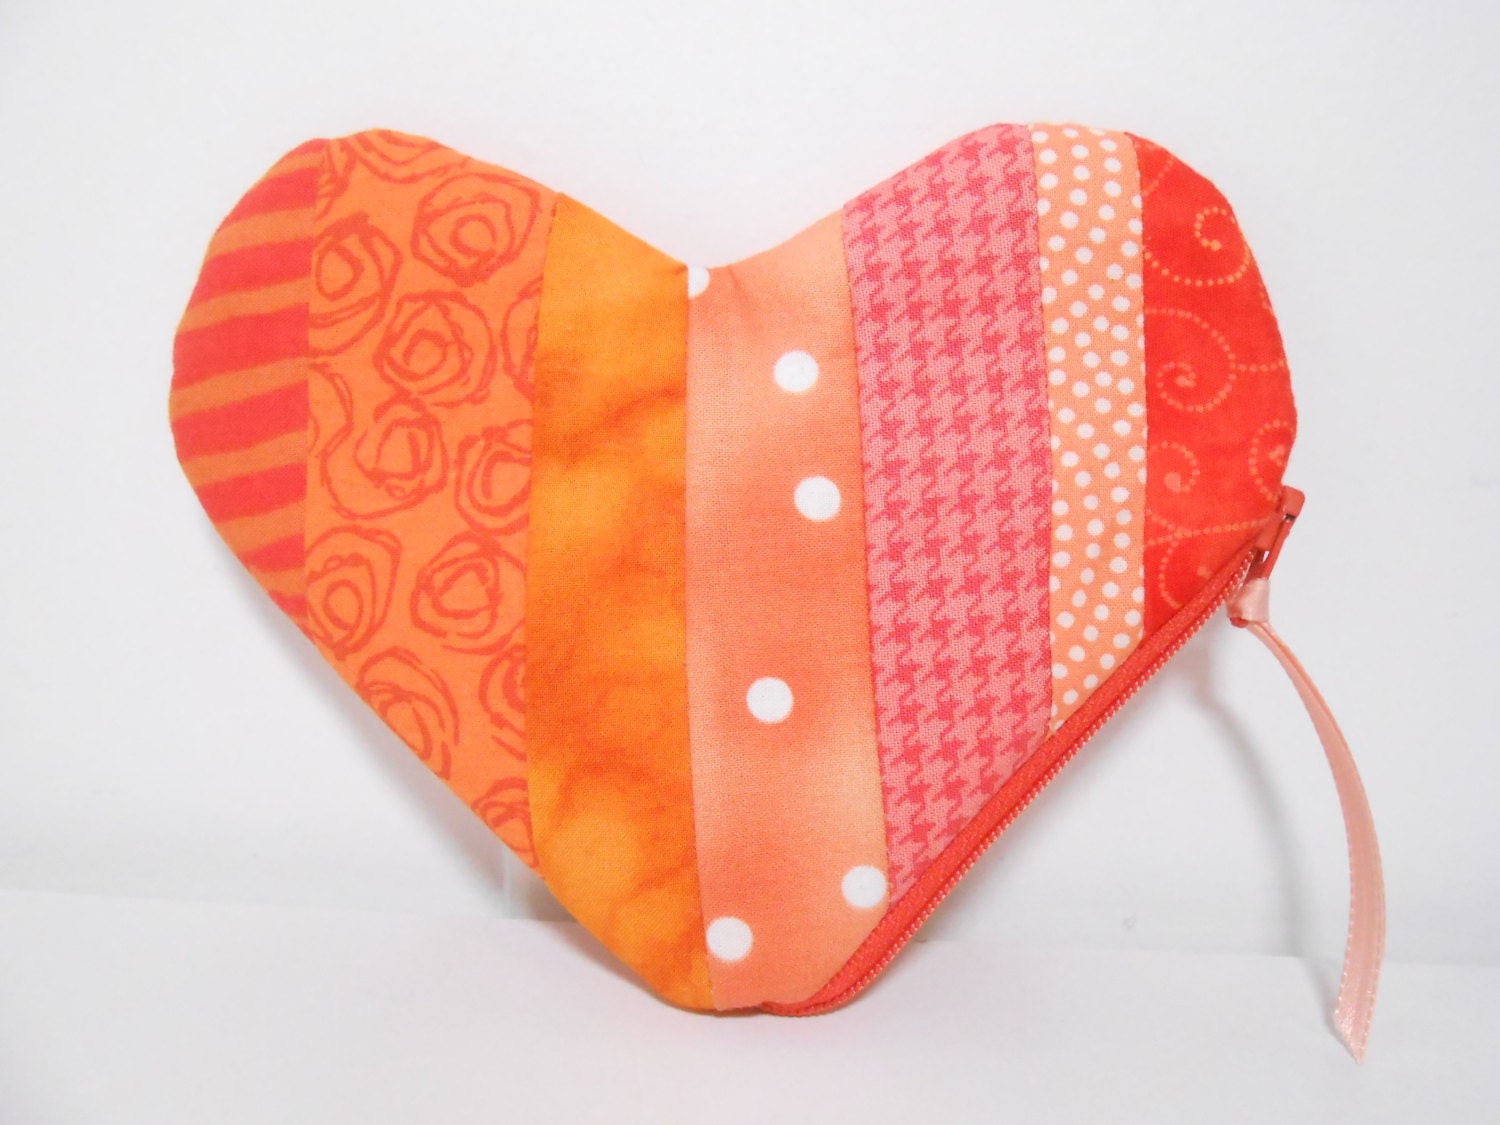 Heart Coin Purse Orange Heart Shaped Quilted by MidnightCreations